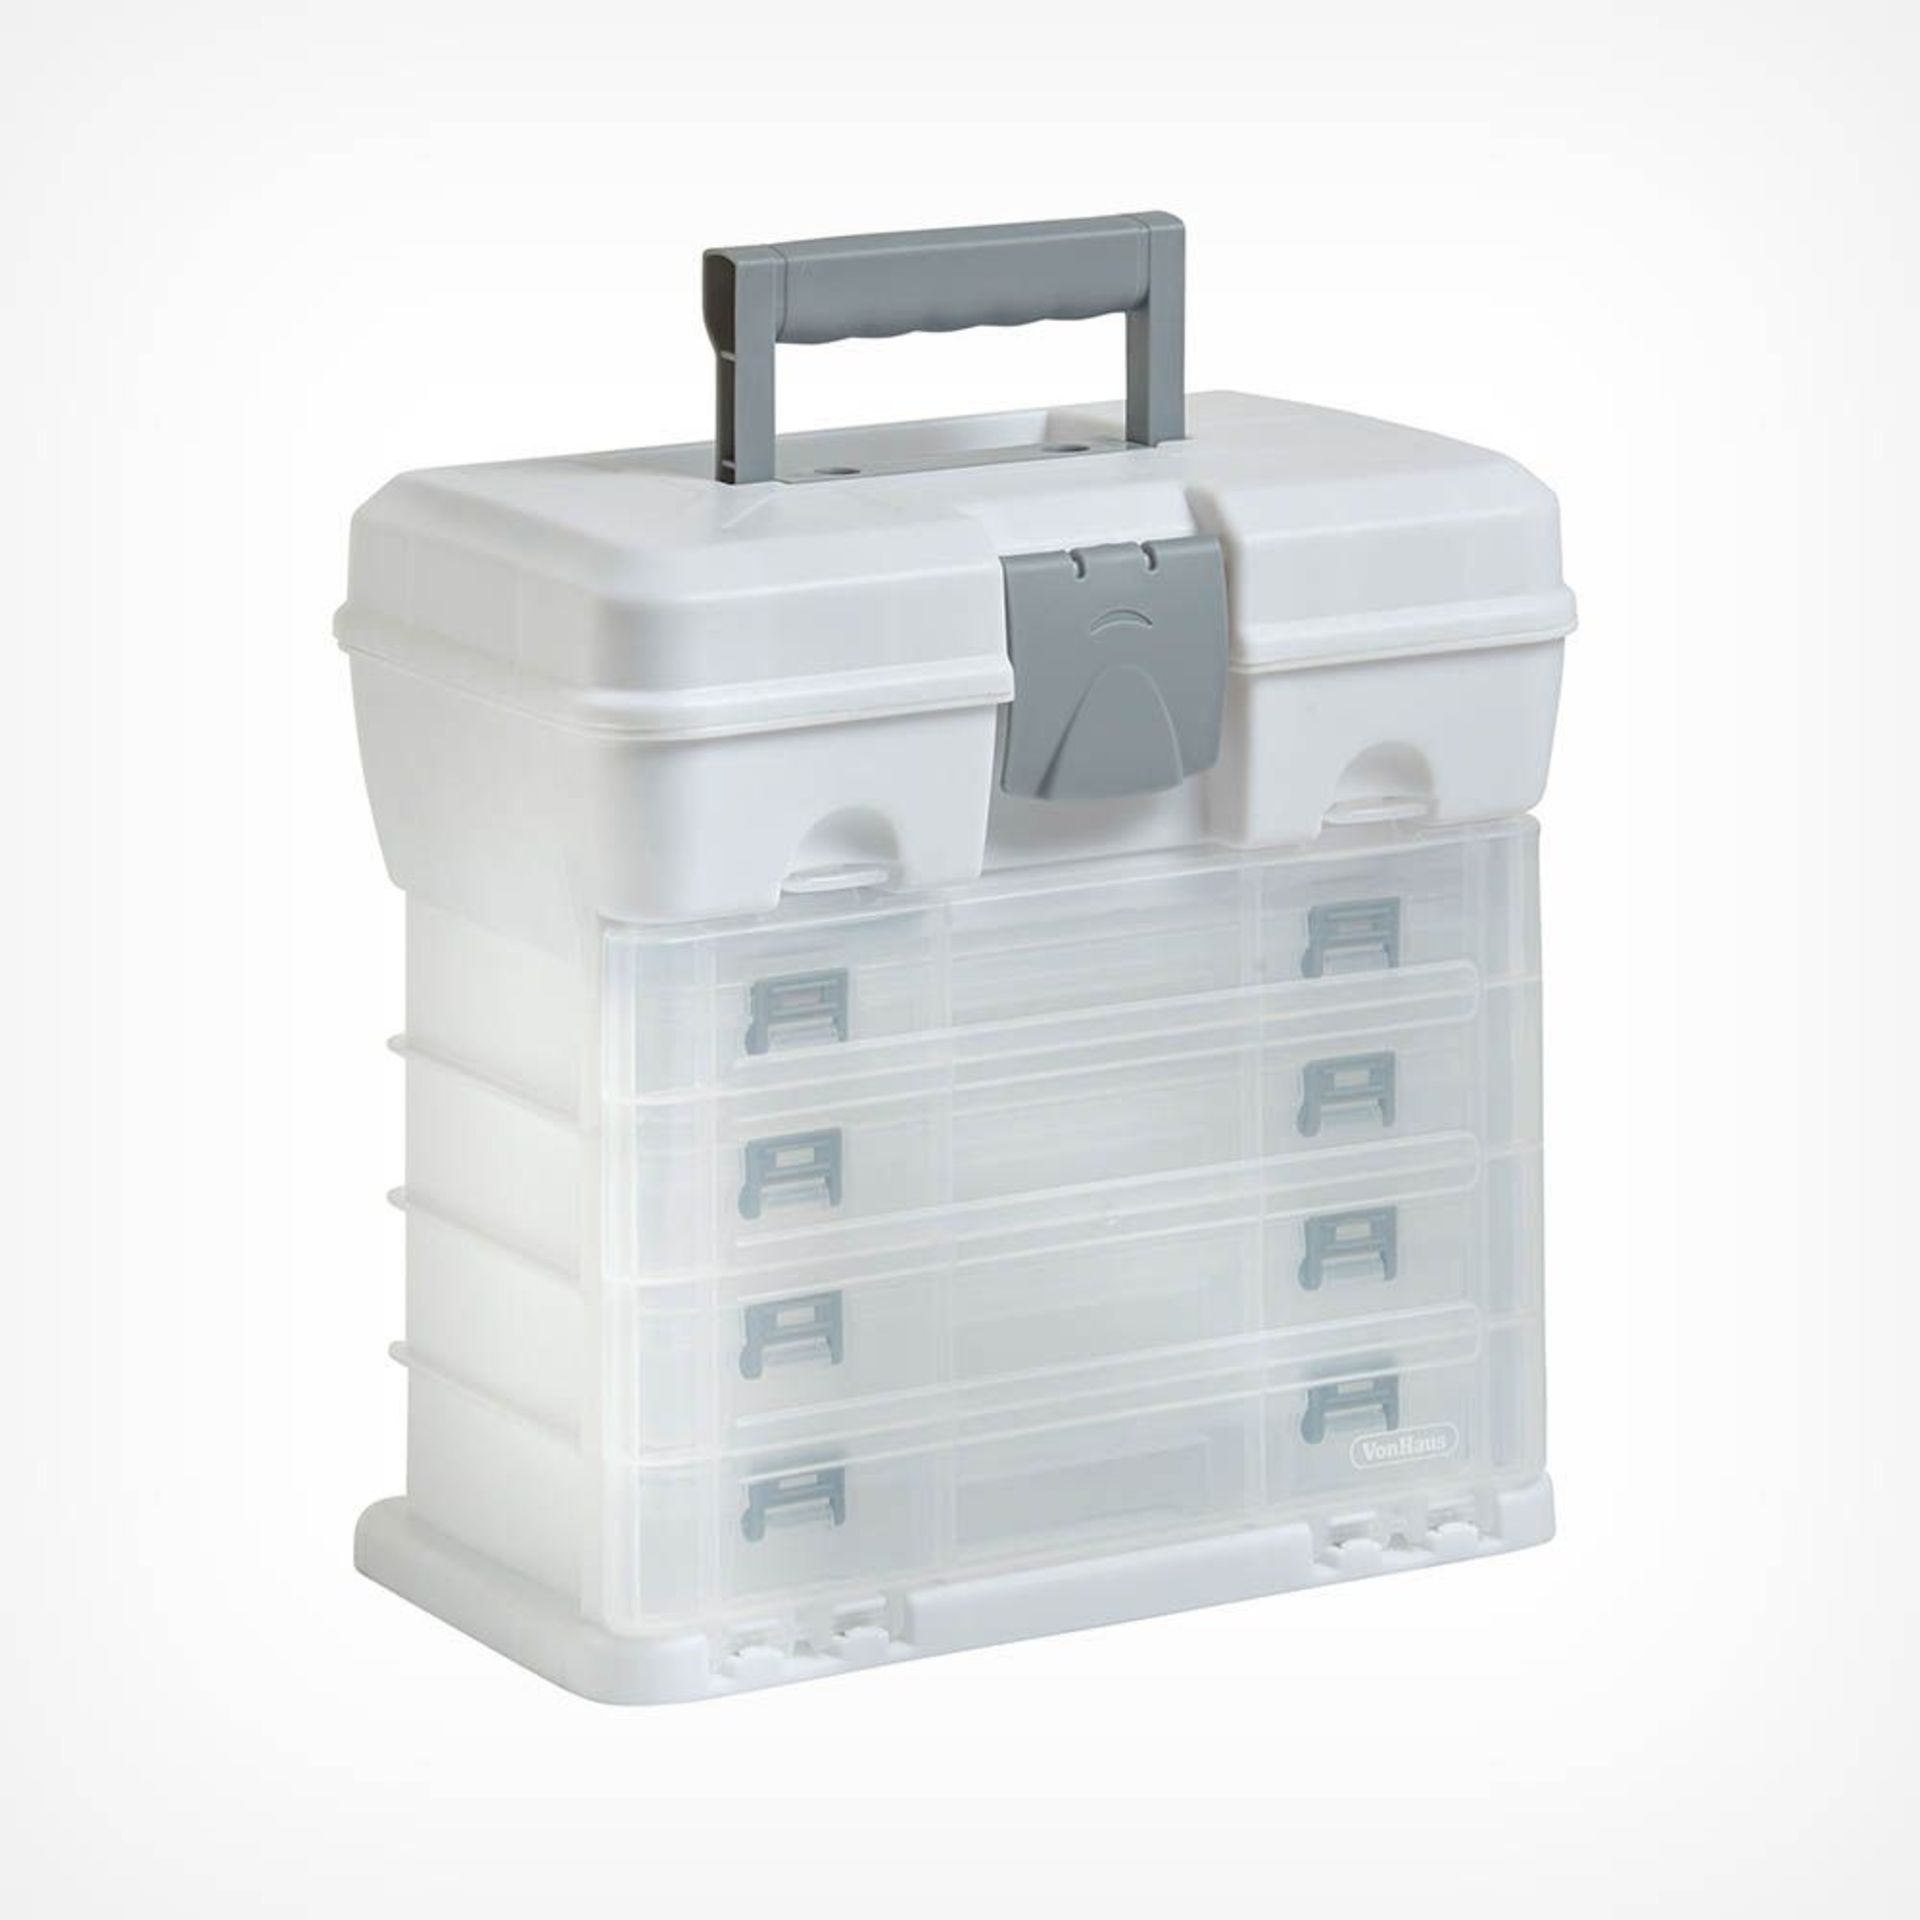 Storage Carry Case. This highly versatile storage solution is just the job for getting a variety